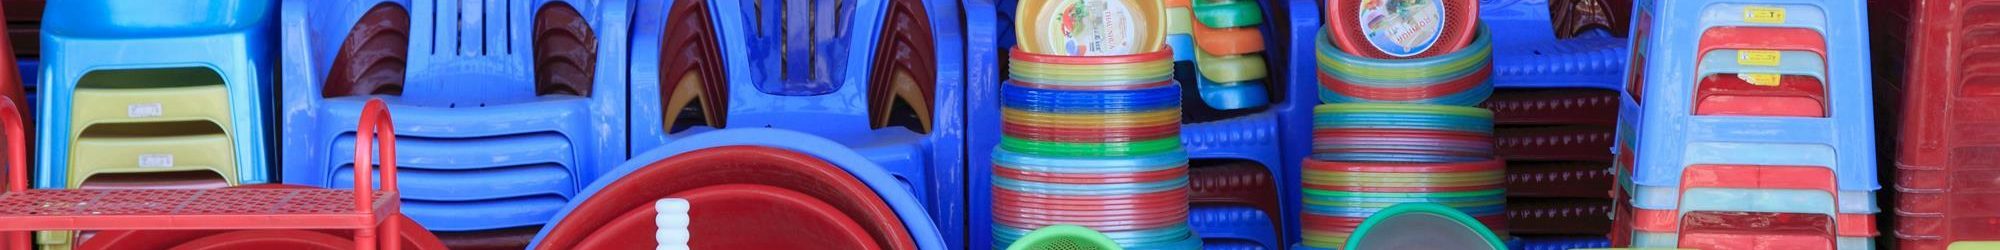 Ghana Plastic Manufacturers Association has accused some Free Zones Companies of engaging in illegal practices resulting in revenue losses